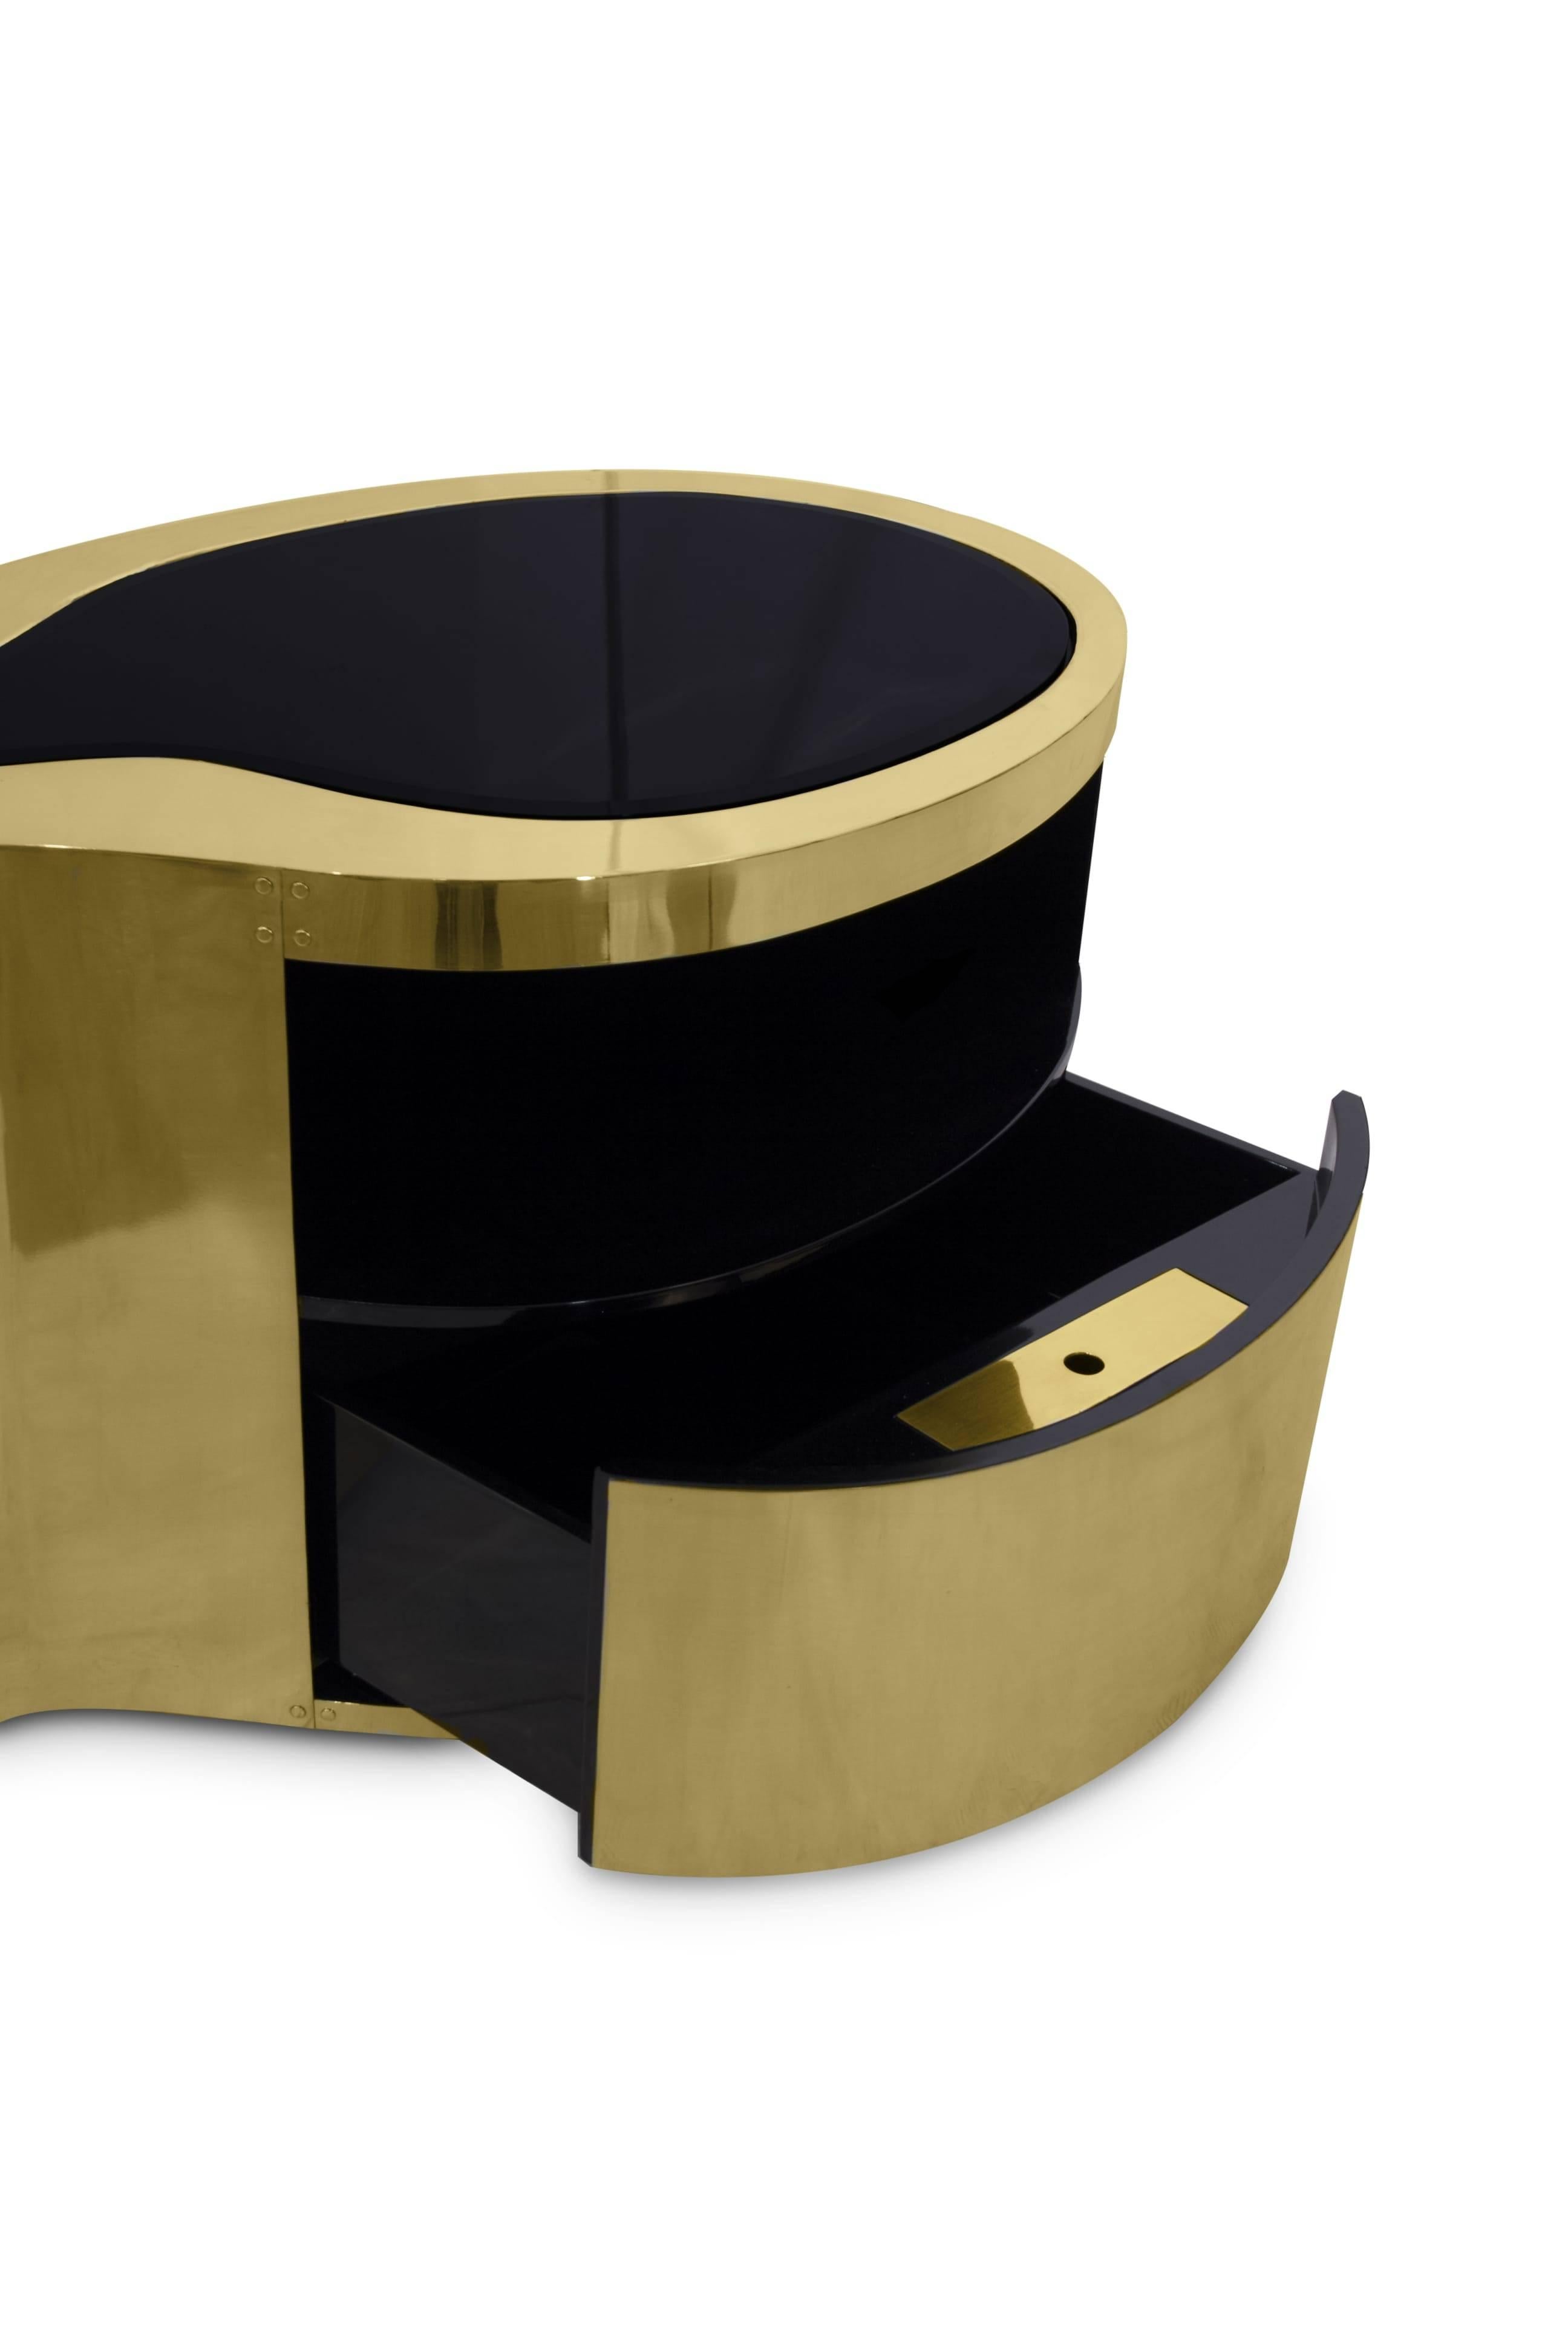 Blackened 20th Century Inspired Curved Brass Nightstand End Tables